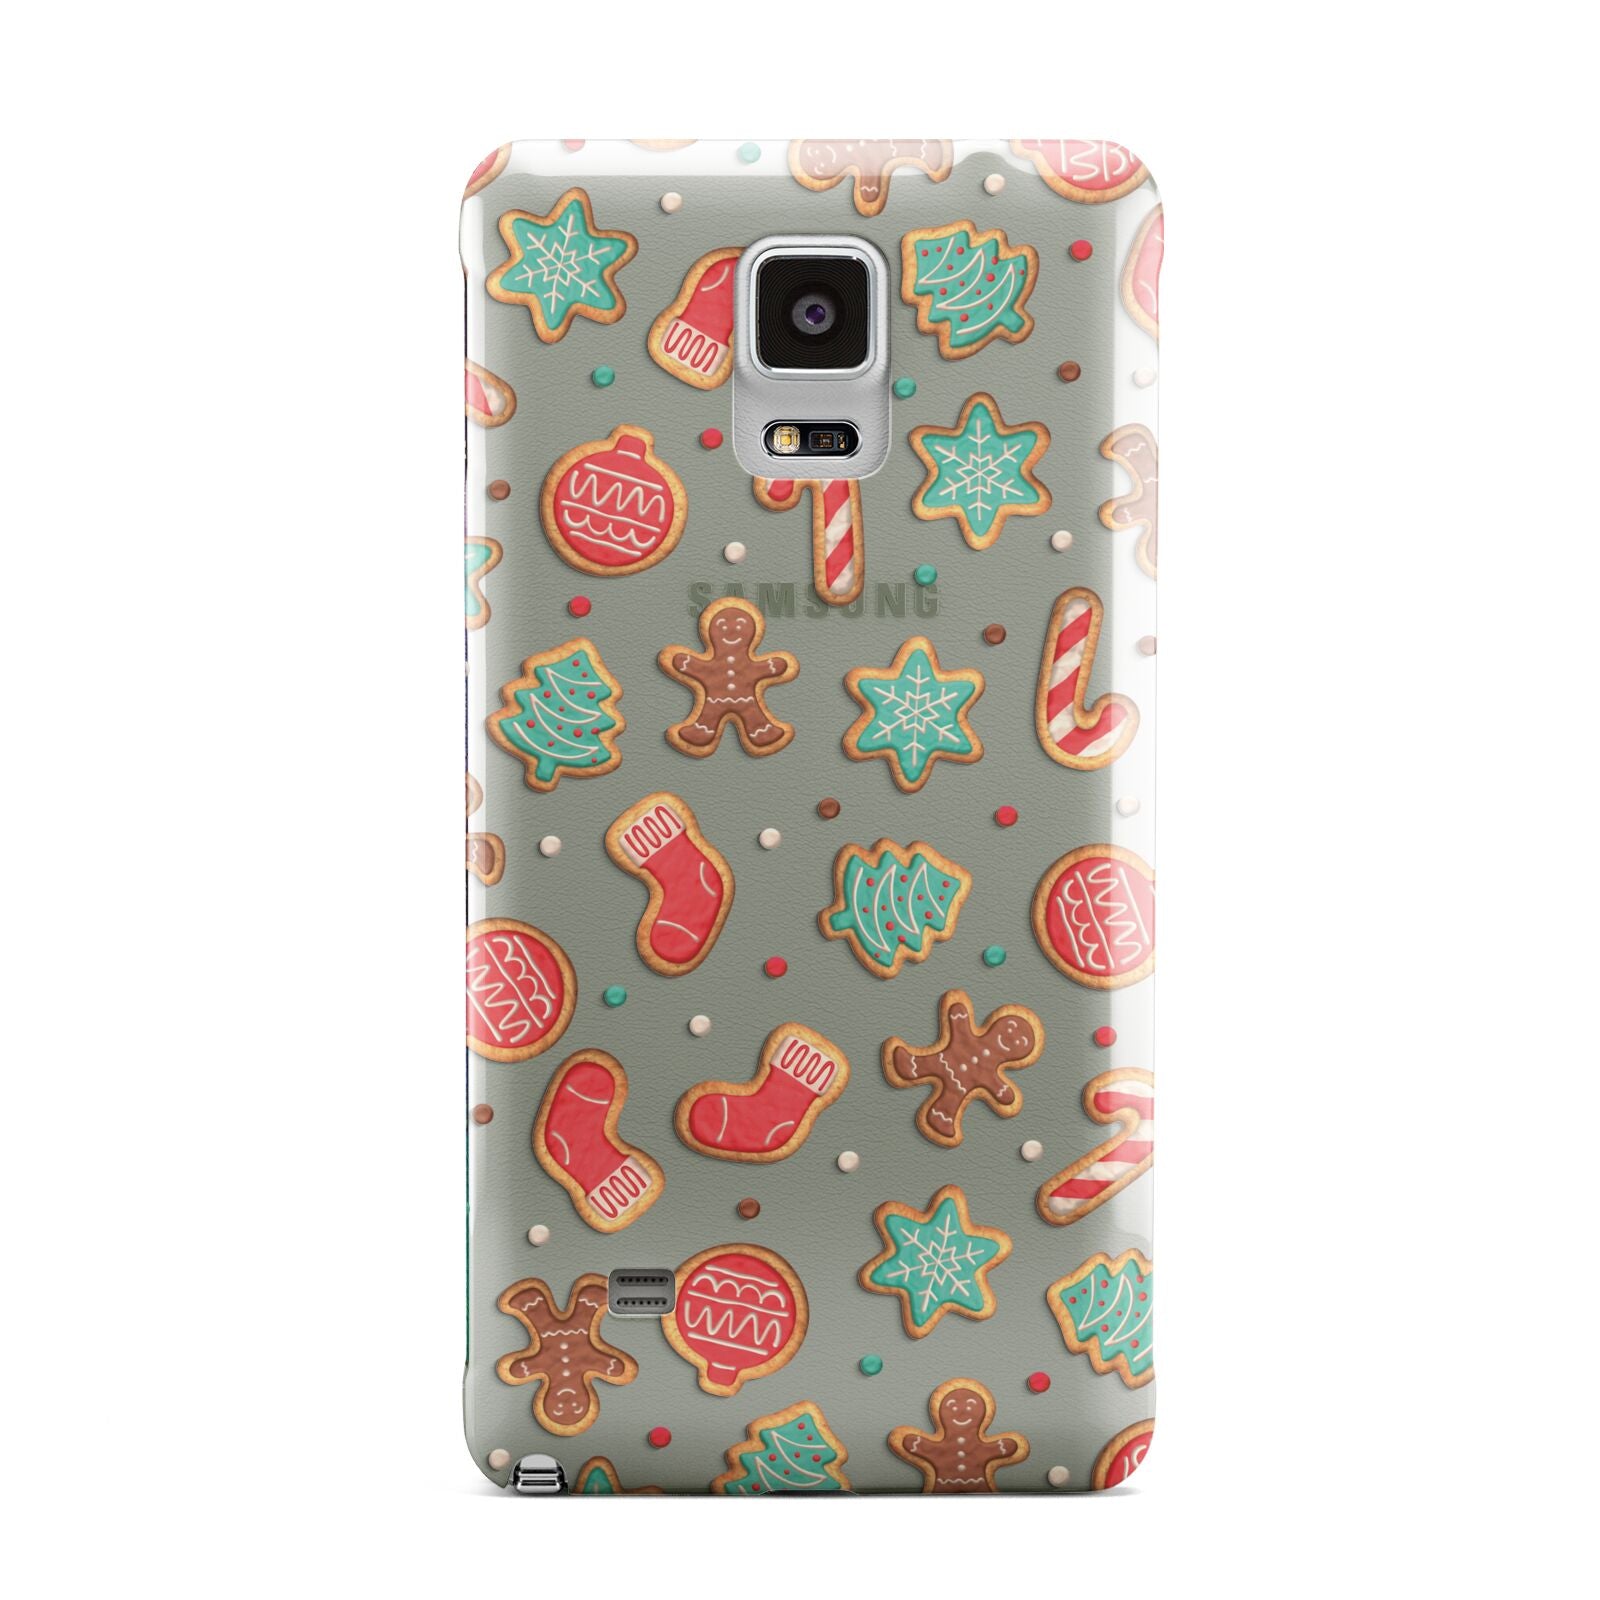 Gingerbread Christmas Samsung Galaxy Note 4 Case